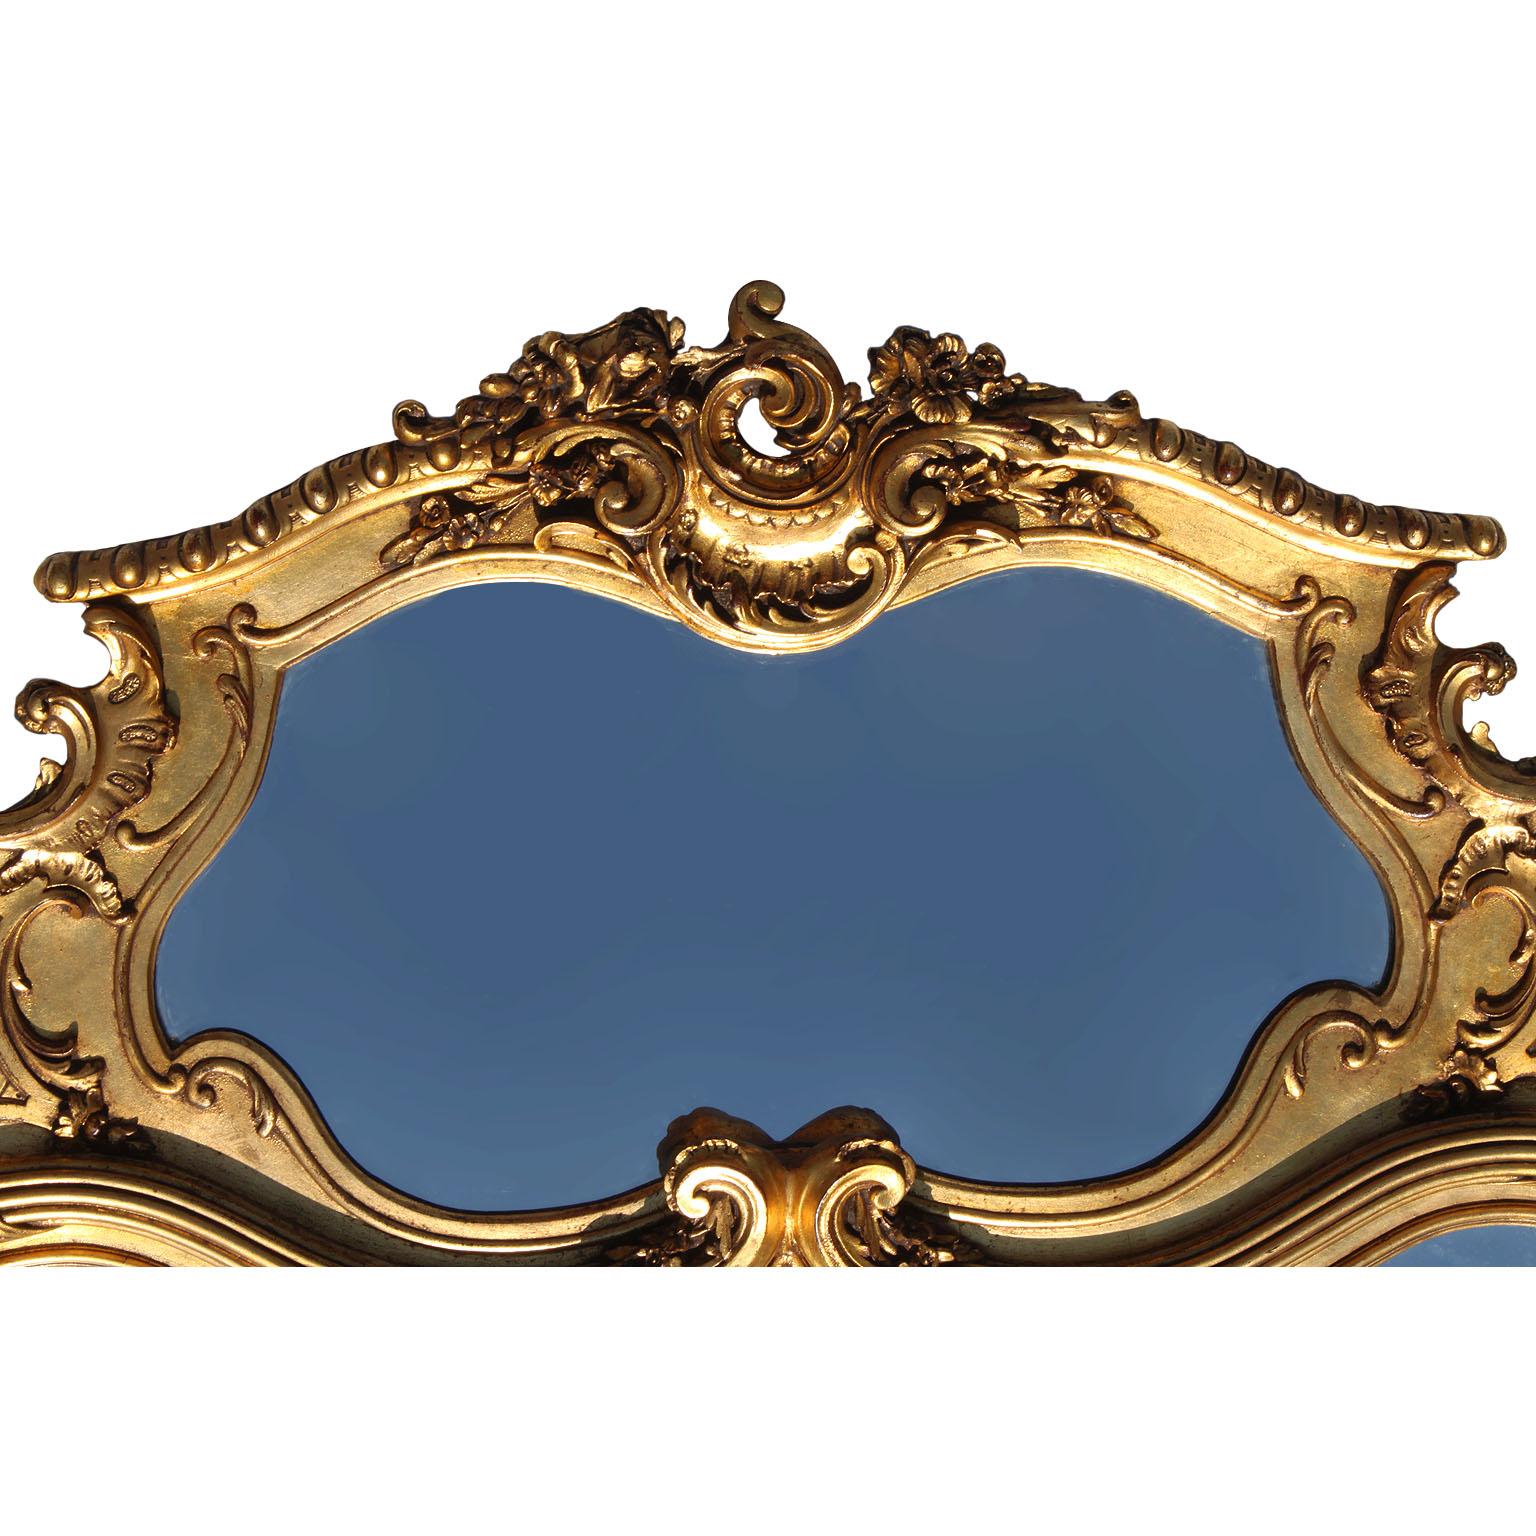 Belle Époque French 19th-20th Century Louis XV Style Giltwood Carved Trumeau Mirror Frame For Sale